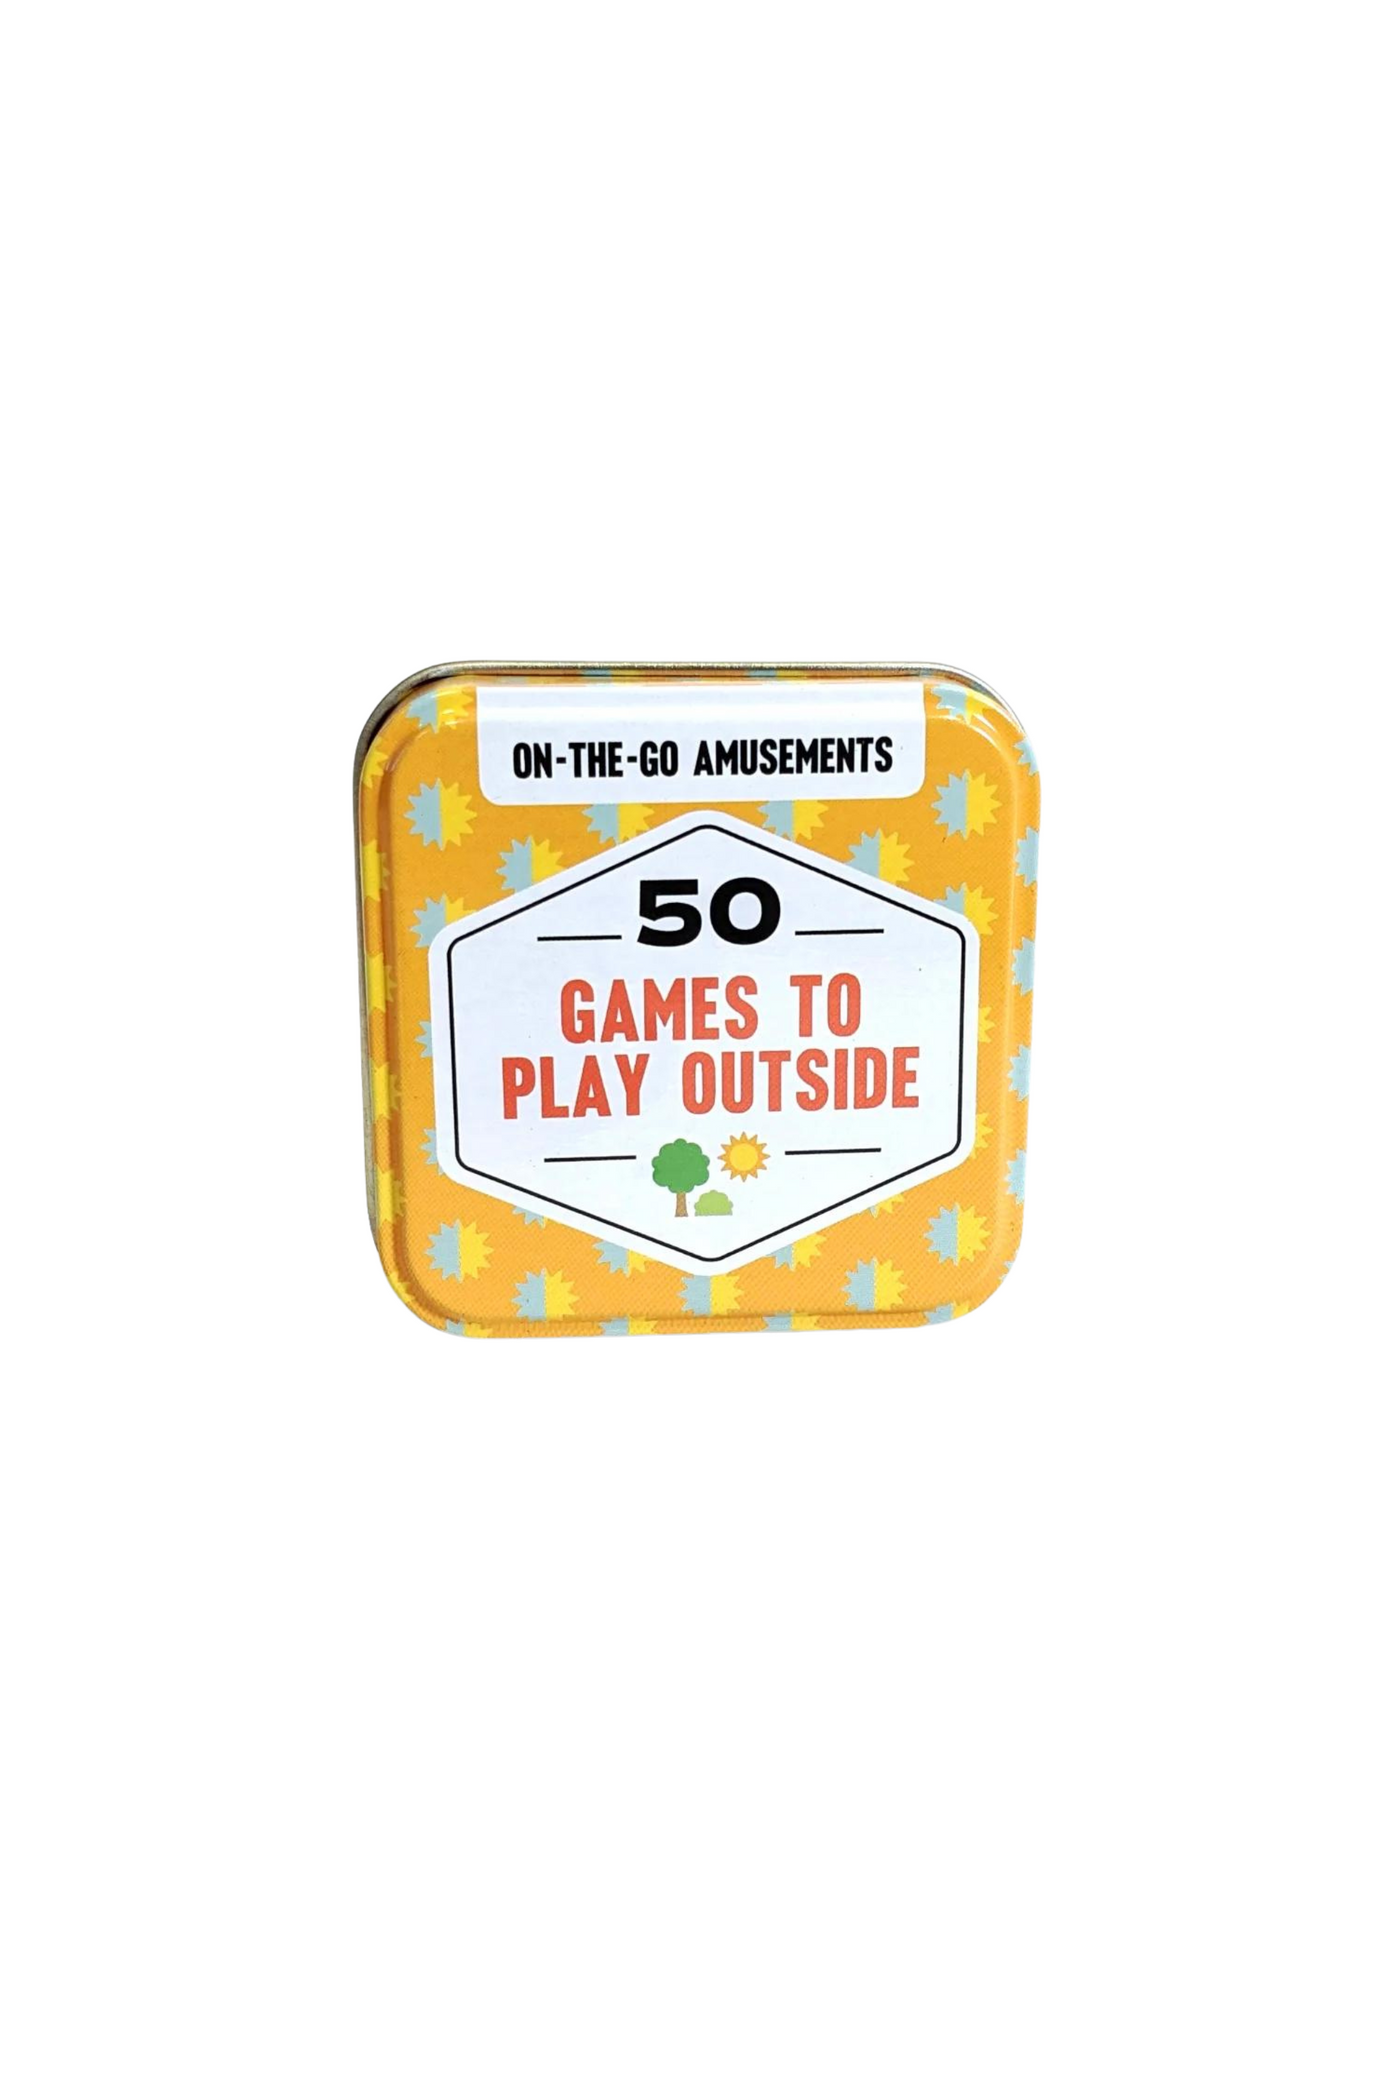 On-the-Go Amusements: 50 Games to Play Outside